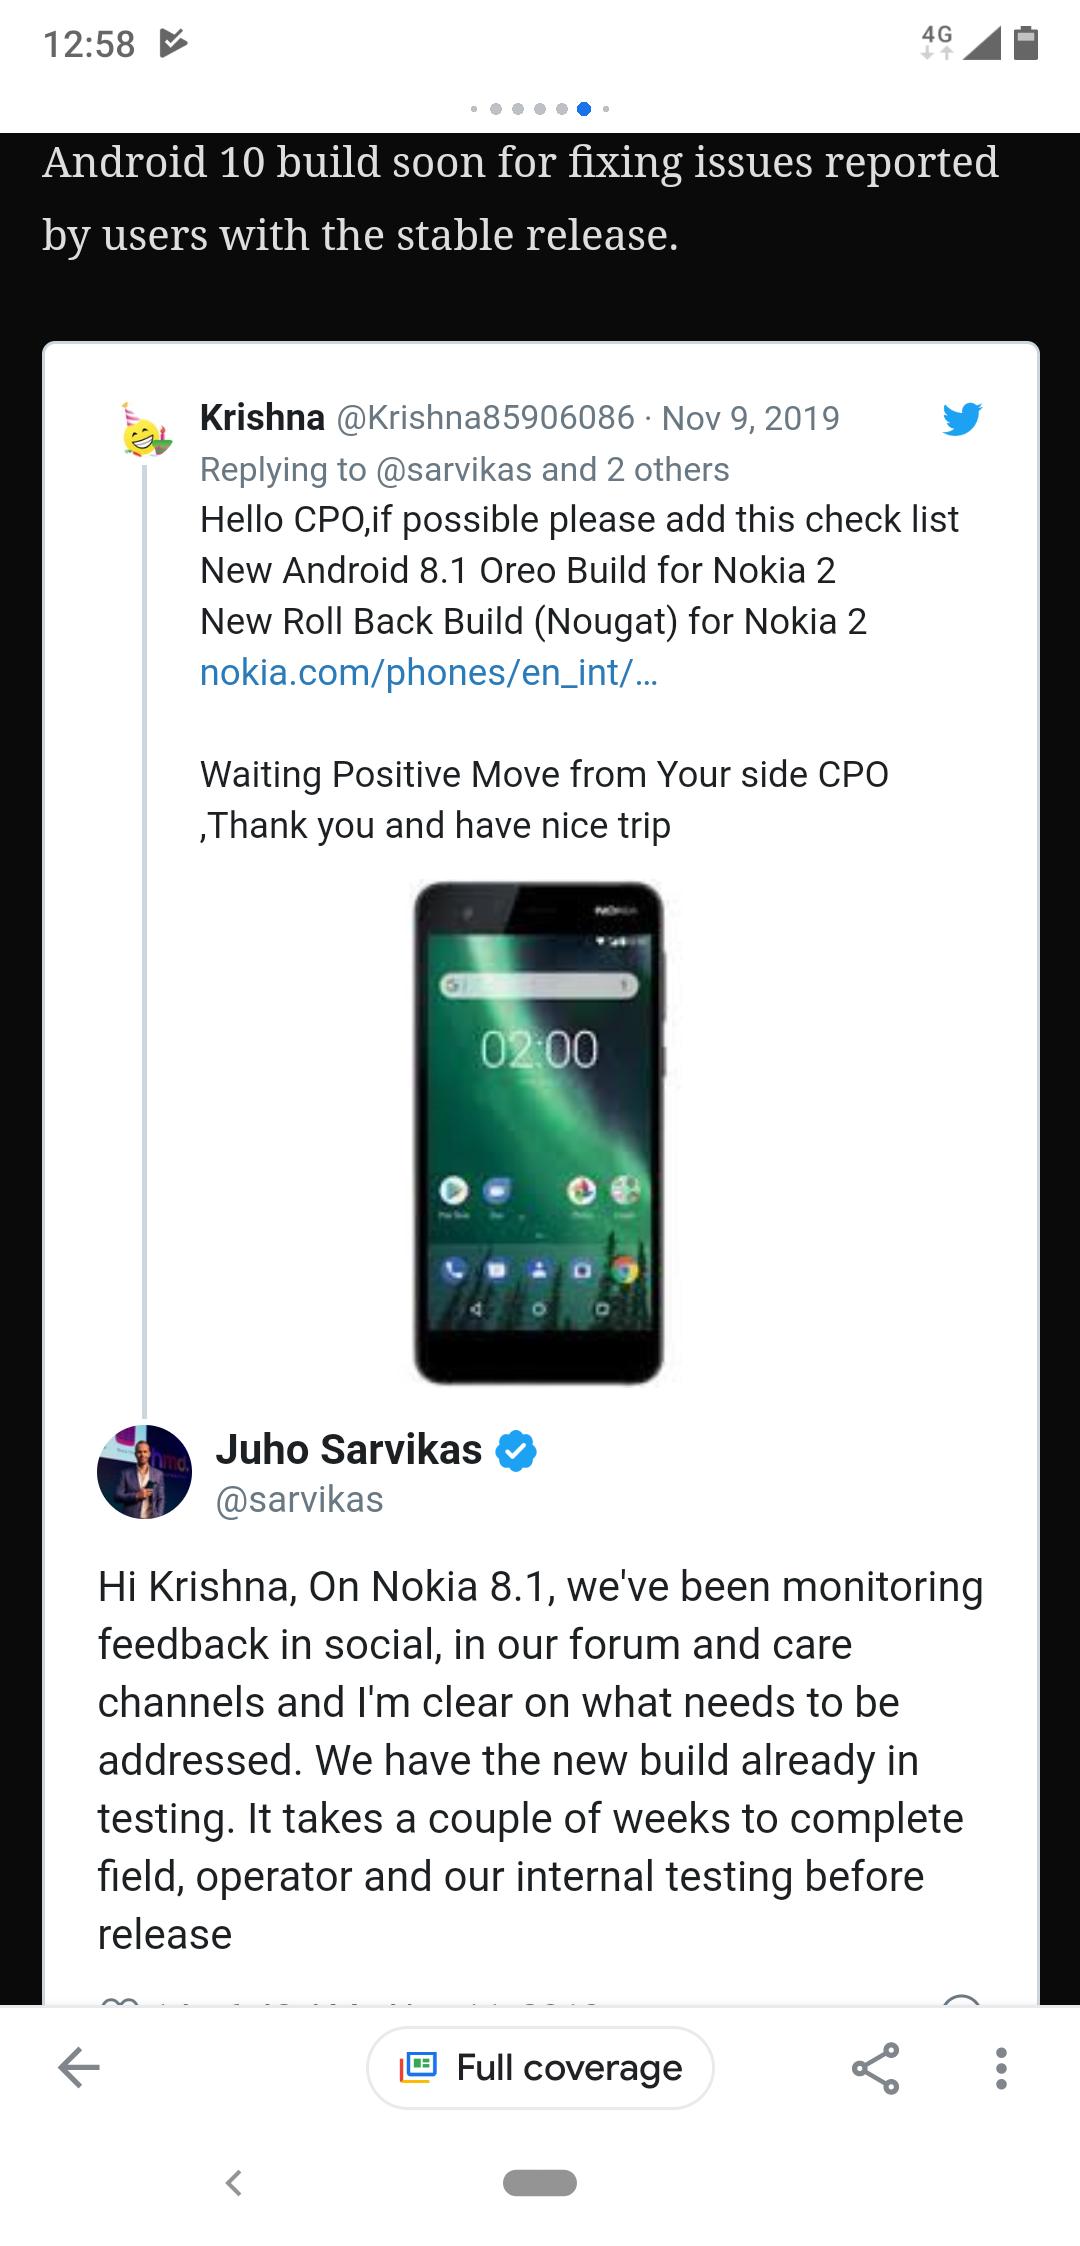 Android 10 for Nokia 8.1 has Netflix HDR & Bluetooth audio bugs, report users 